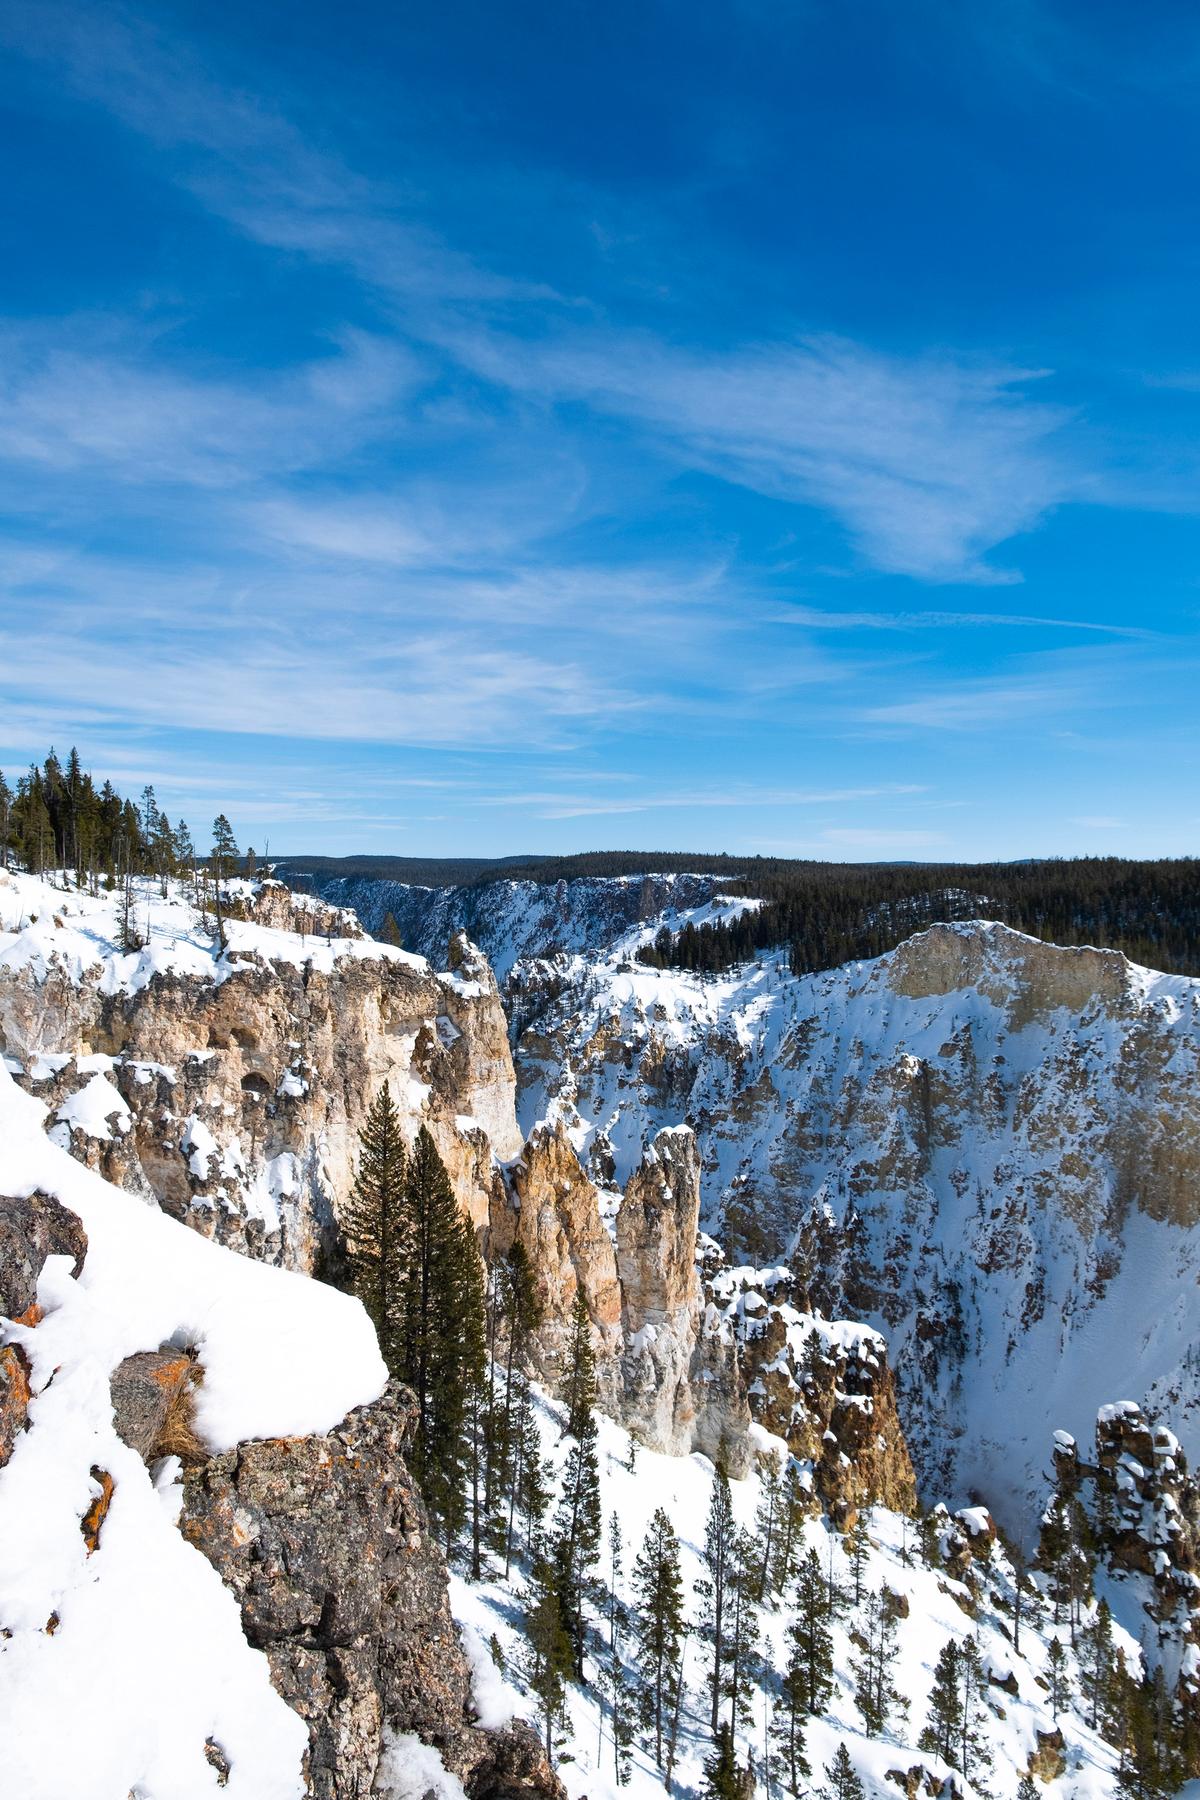 The Grand Canyon of the Yellowstone. (Benjamin Myers/TNS)